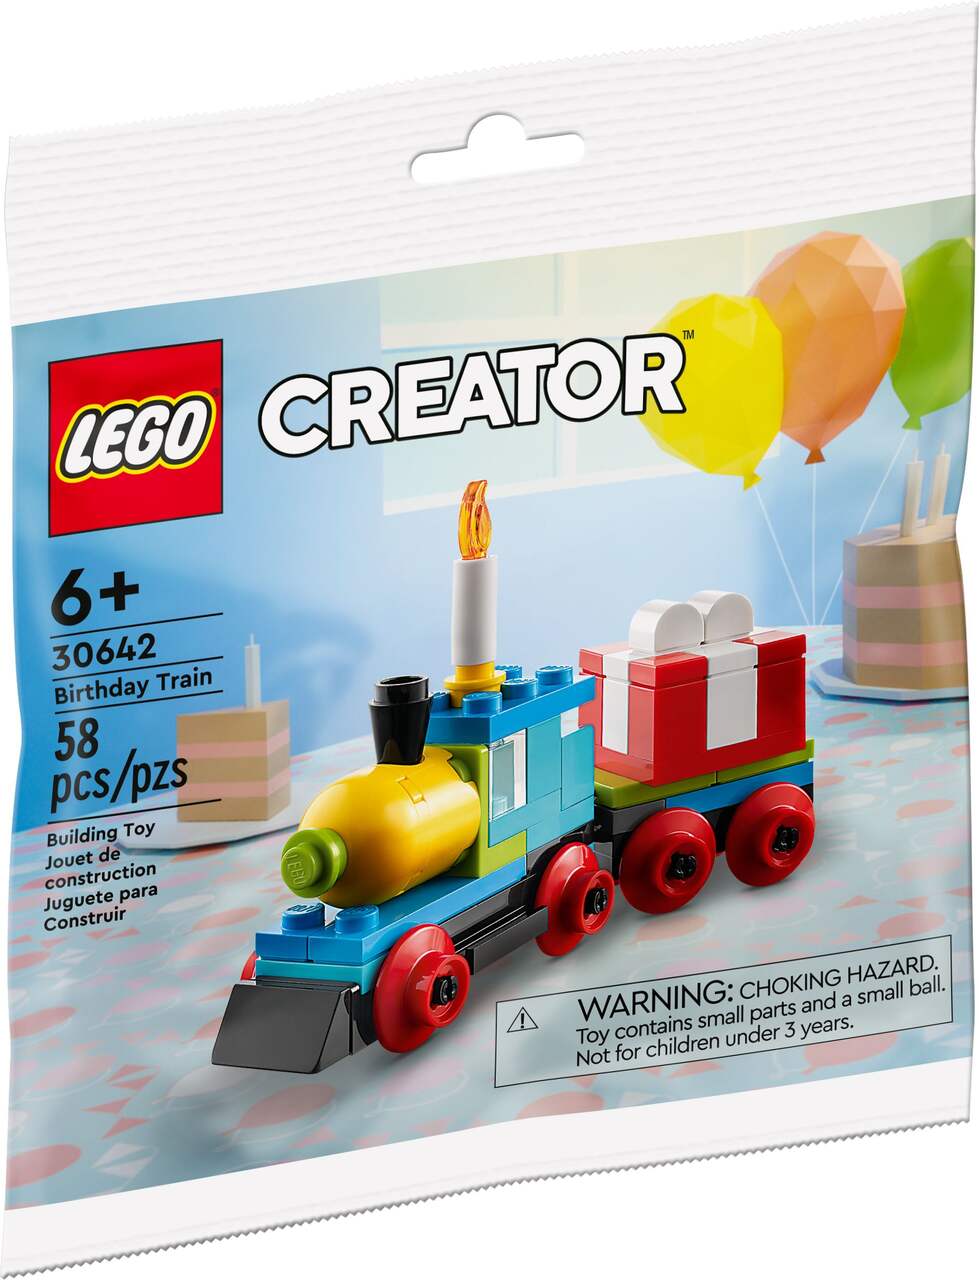 Lego's new toy train is a STEM tool for preschoolers